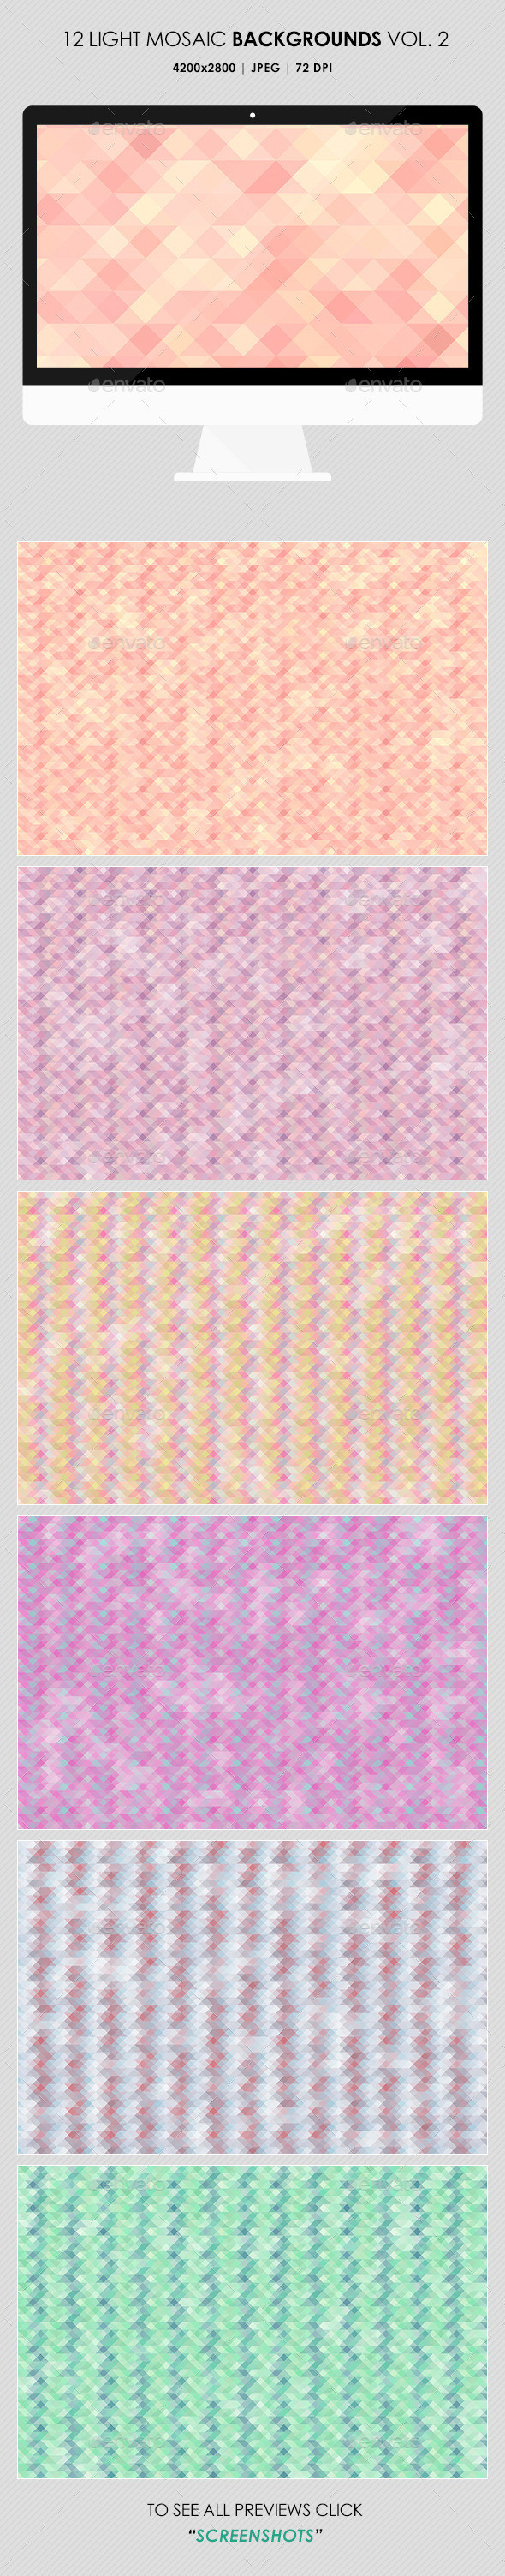 Light mosaic backgrounds vol2 preview